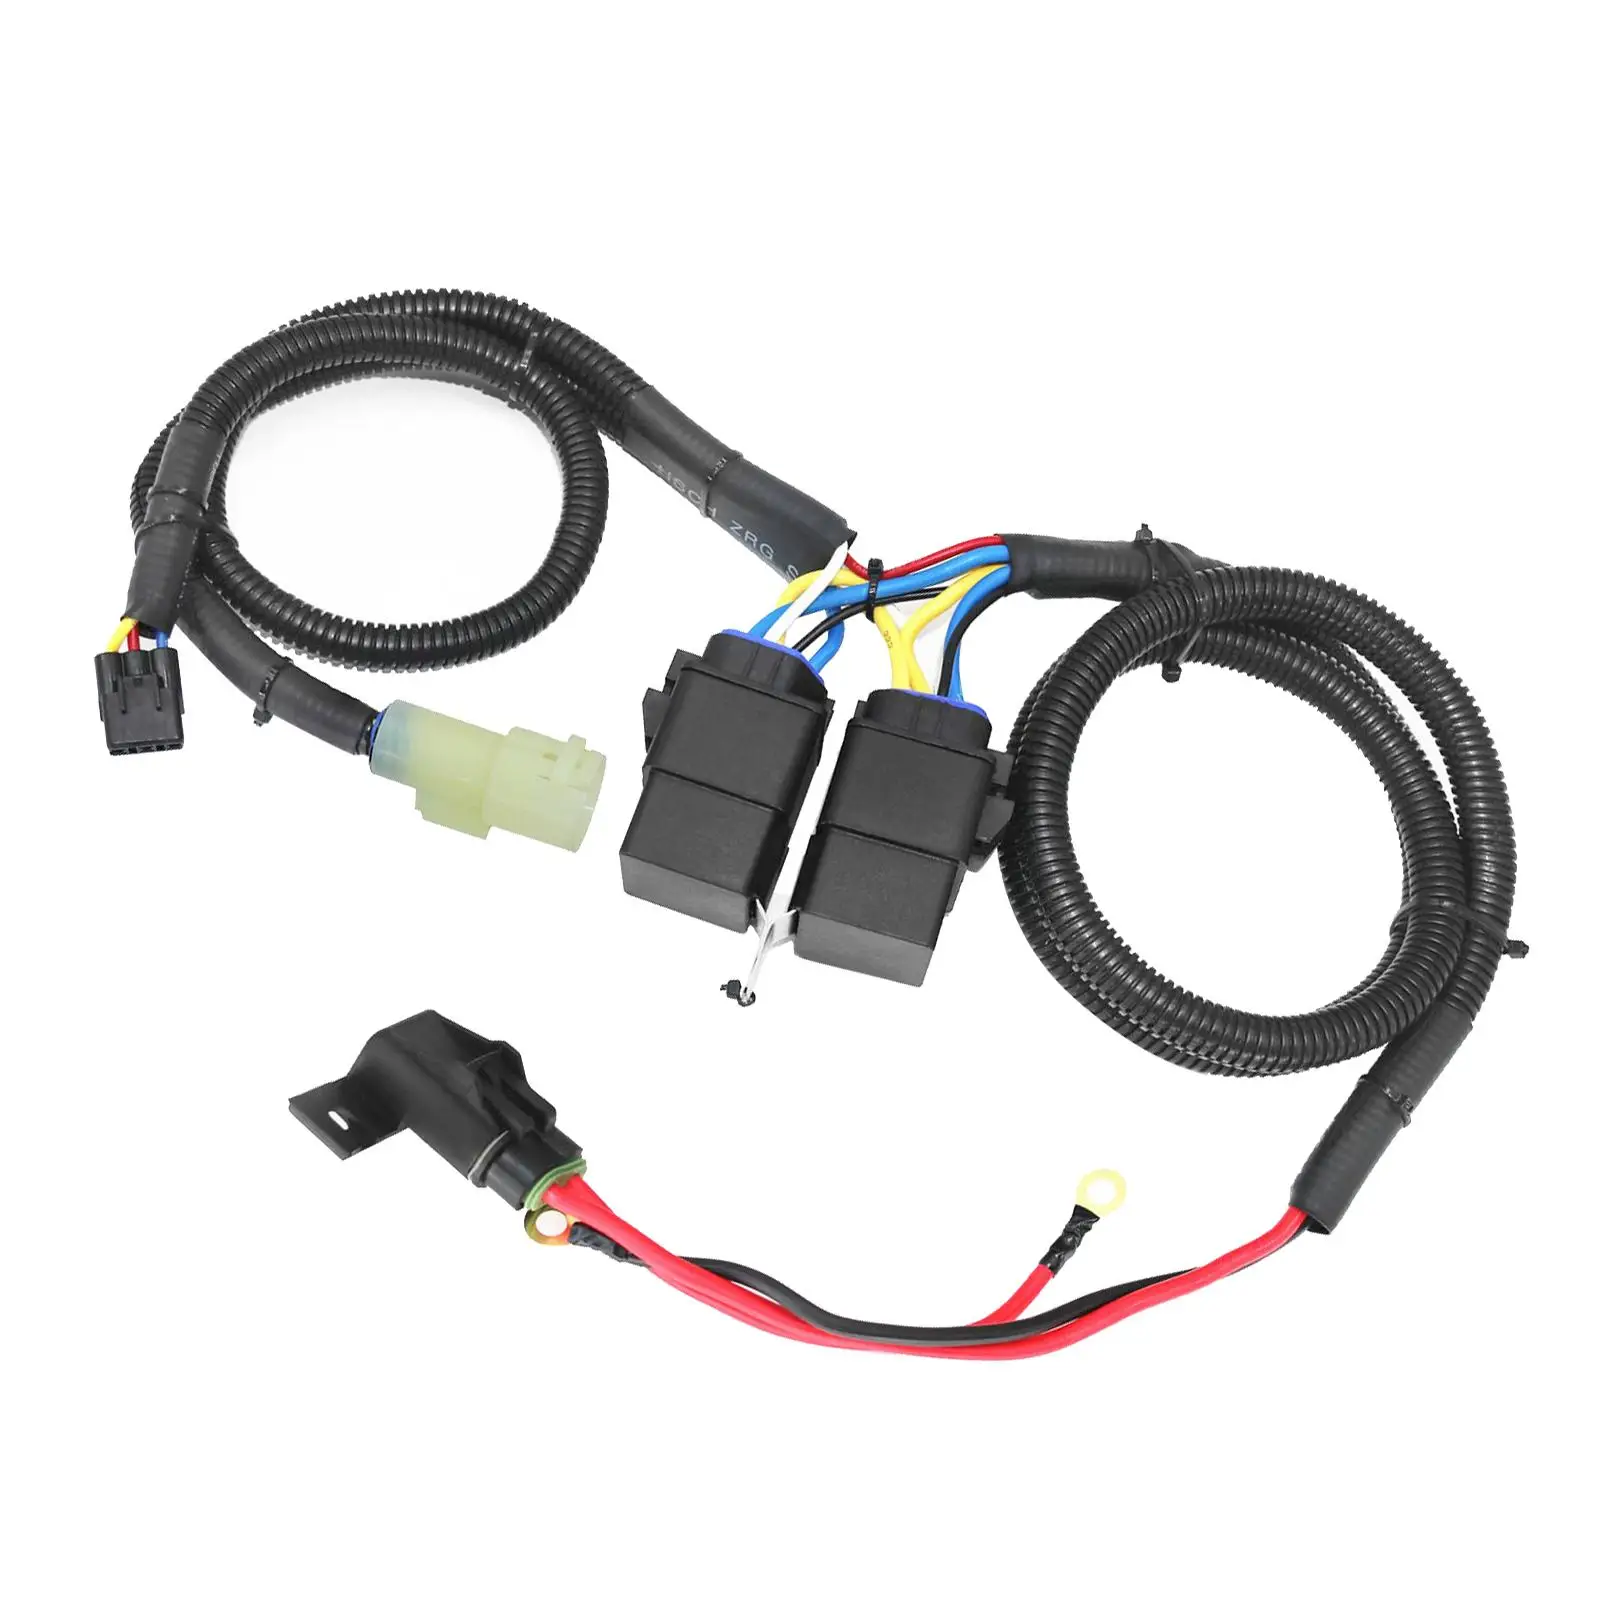 Shift Wiring Harness Kit for Honda Rancher 350 ES Replaces Accessories